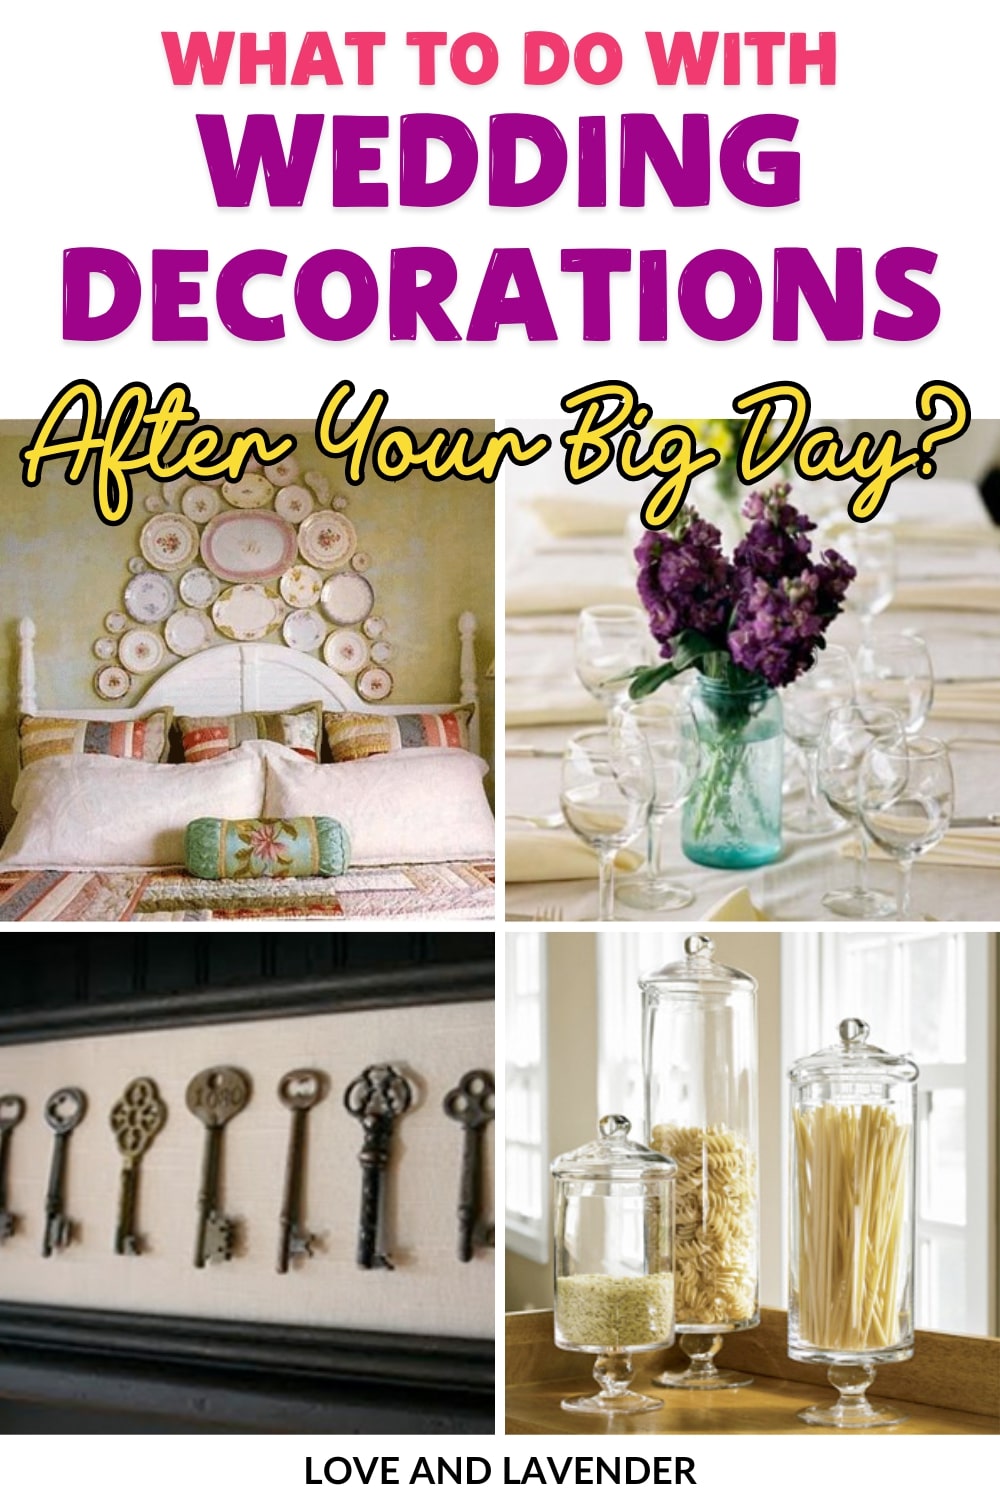 How to Reuse Items from the Wedding in Your Home